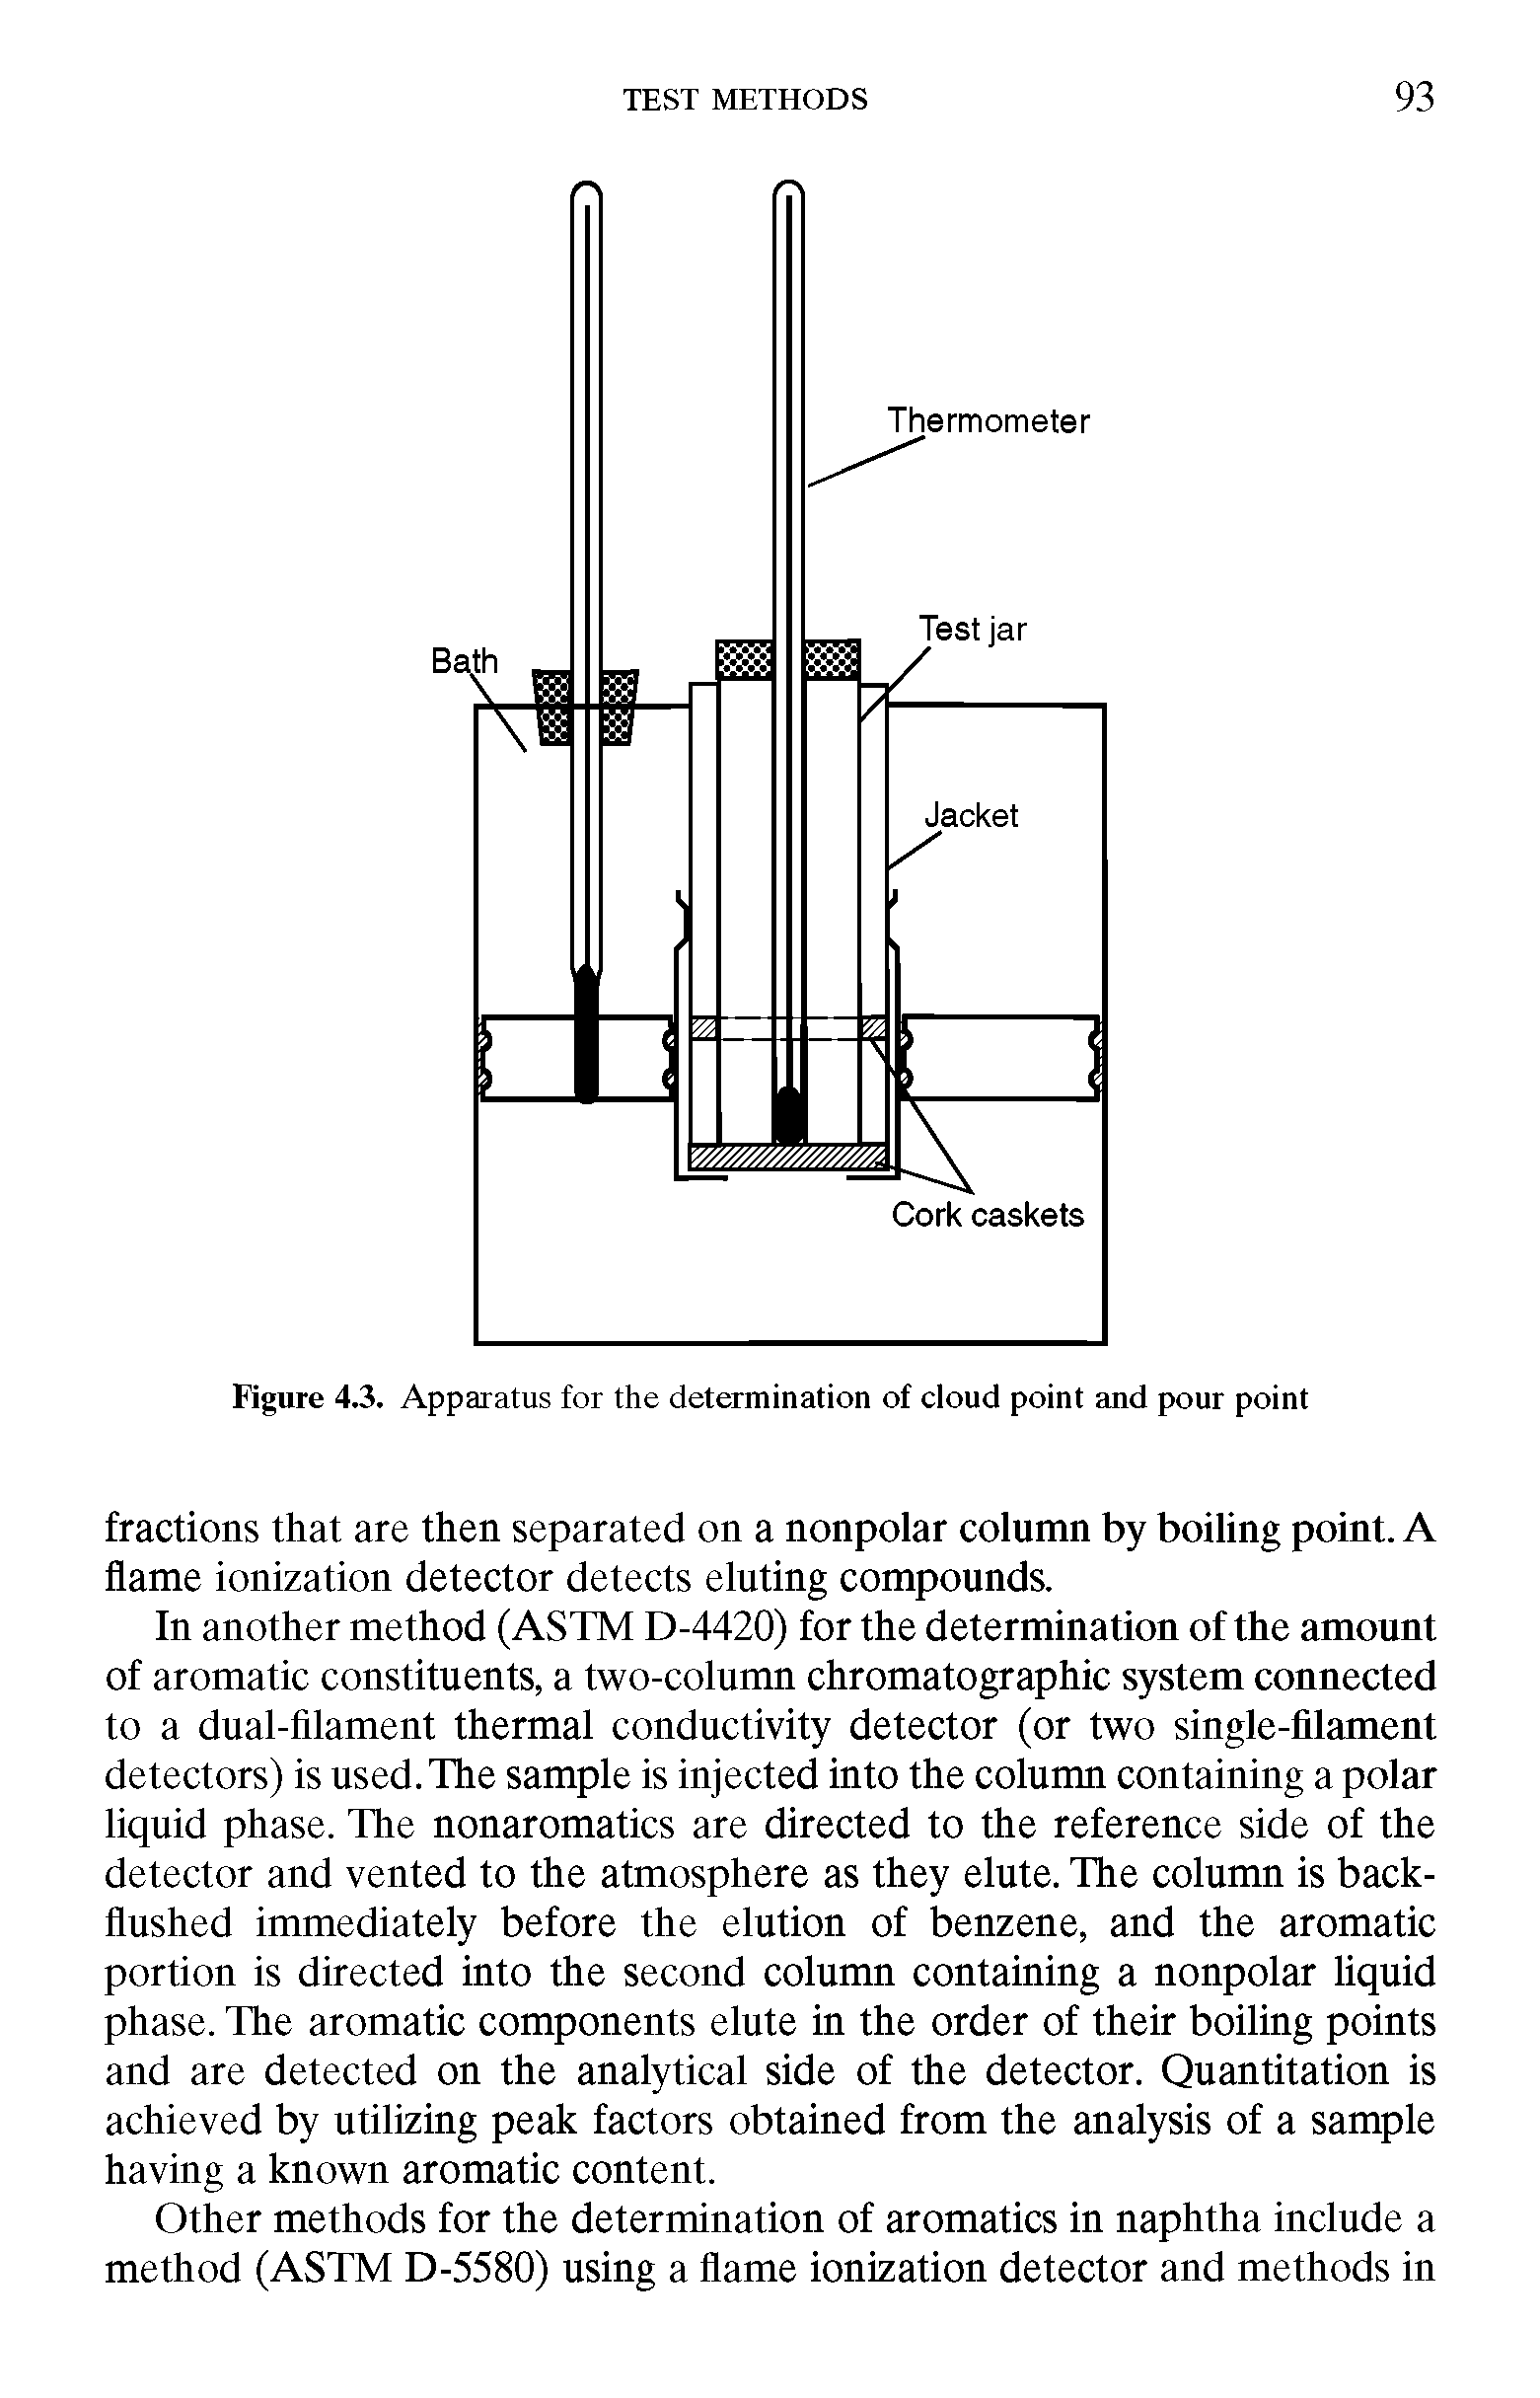 Figure 4.3. Apparatus for the determination of cloud point and pour point...